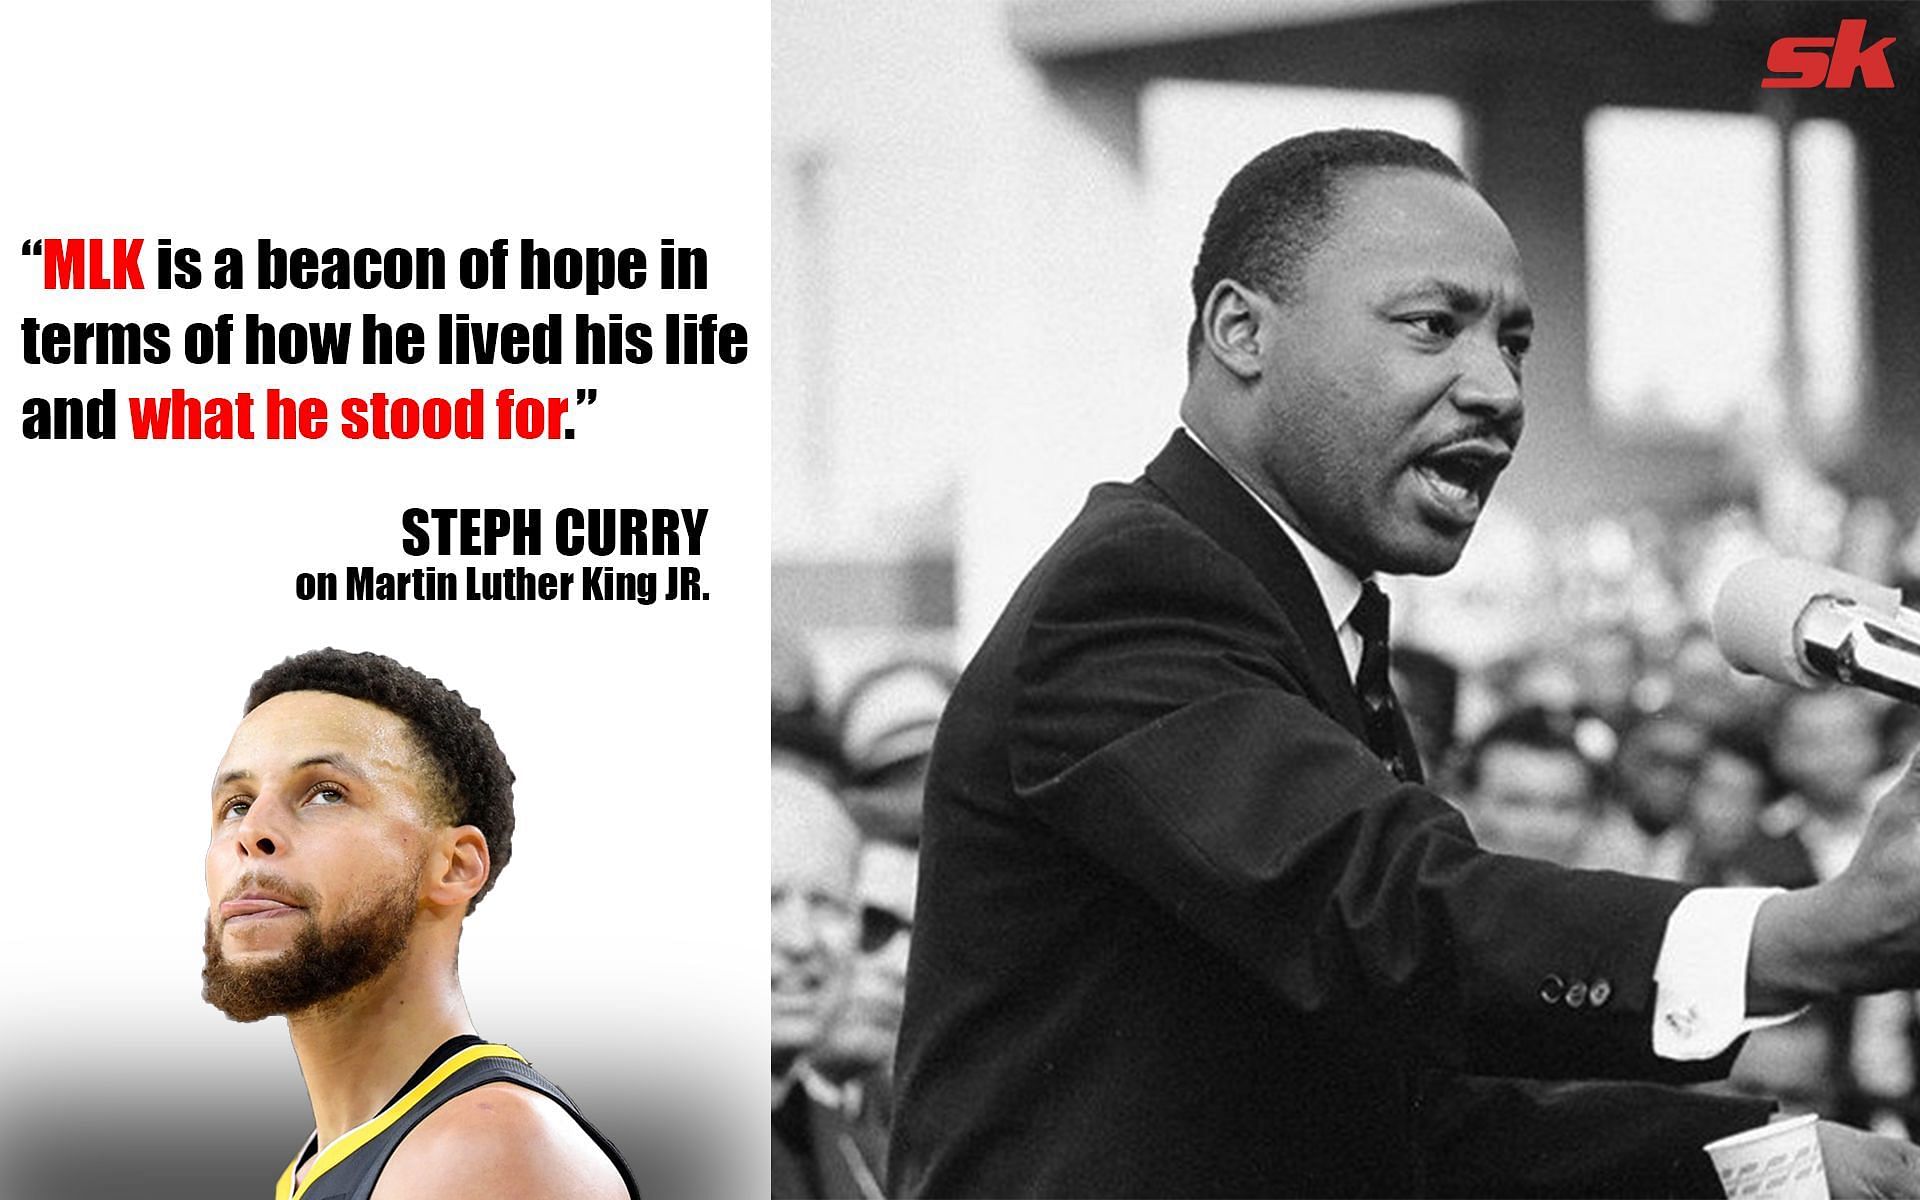 Stephen Curry pays tribute to Martin Luther King Jr.